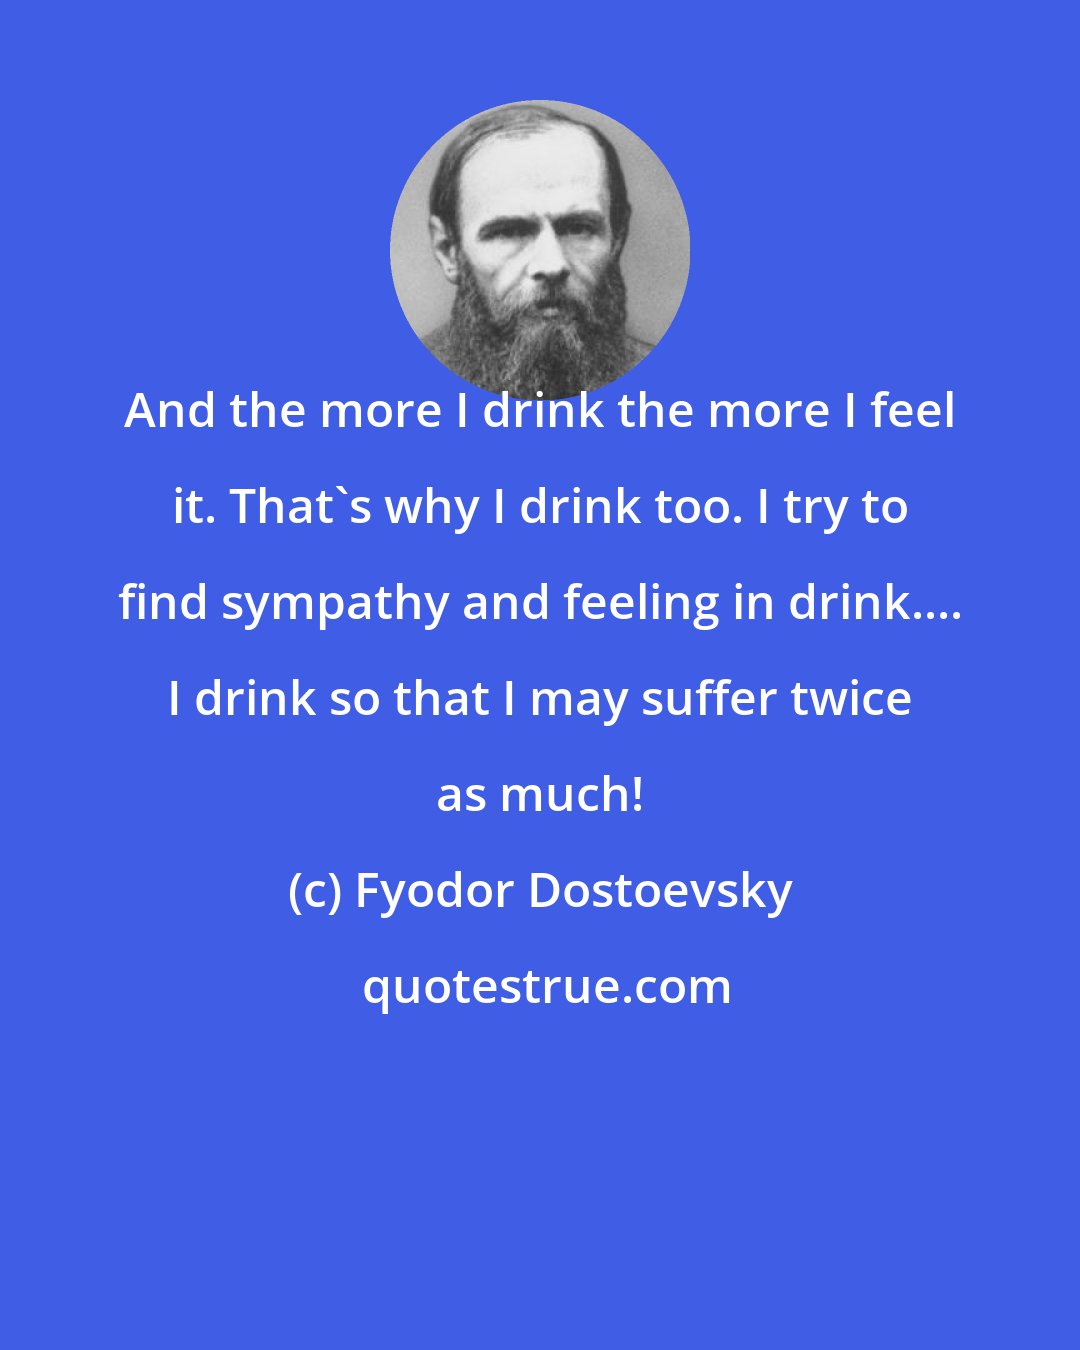 Fyodor Dostoevsky: And the more I drink the more I feel it. That's why I drink too. I try to find sympathy and feeling in drink.... I drink so that I may suffer twice as much!